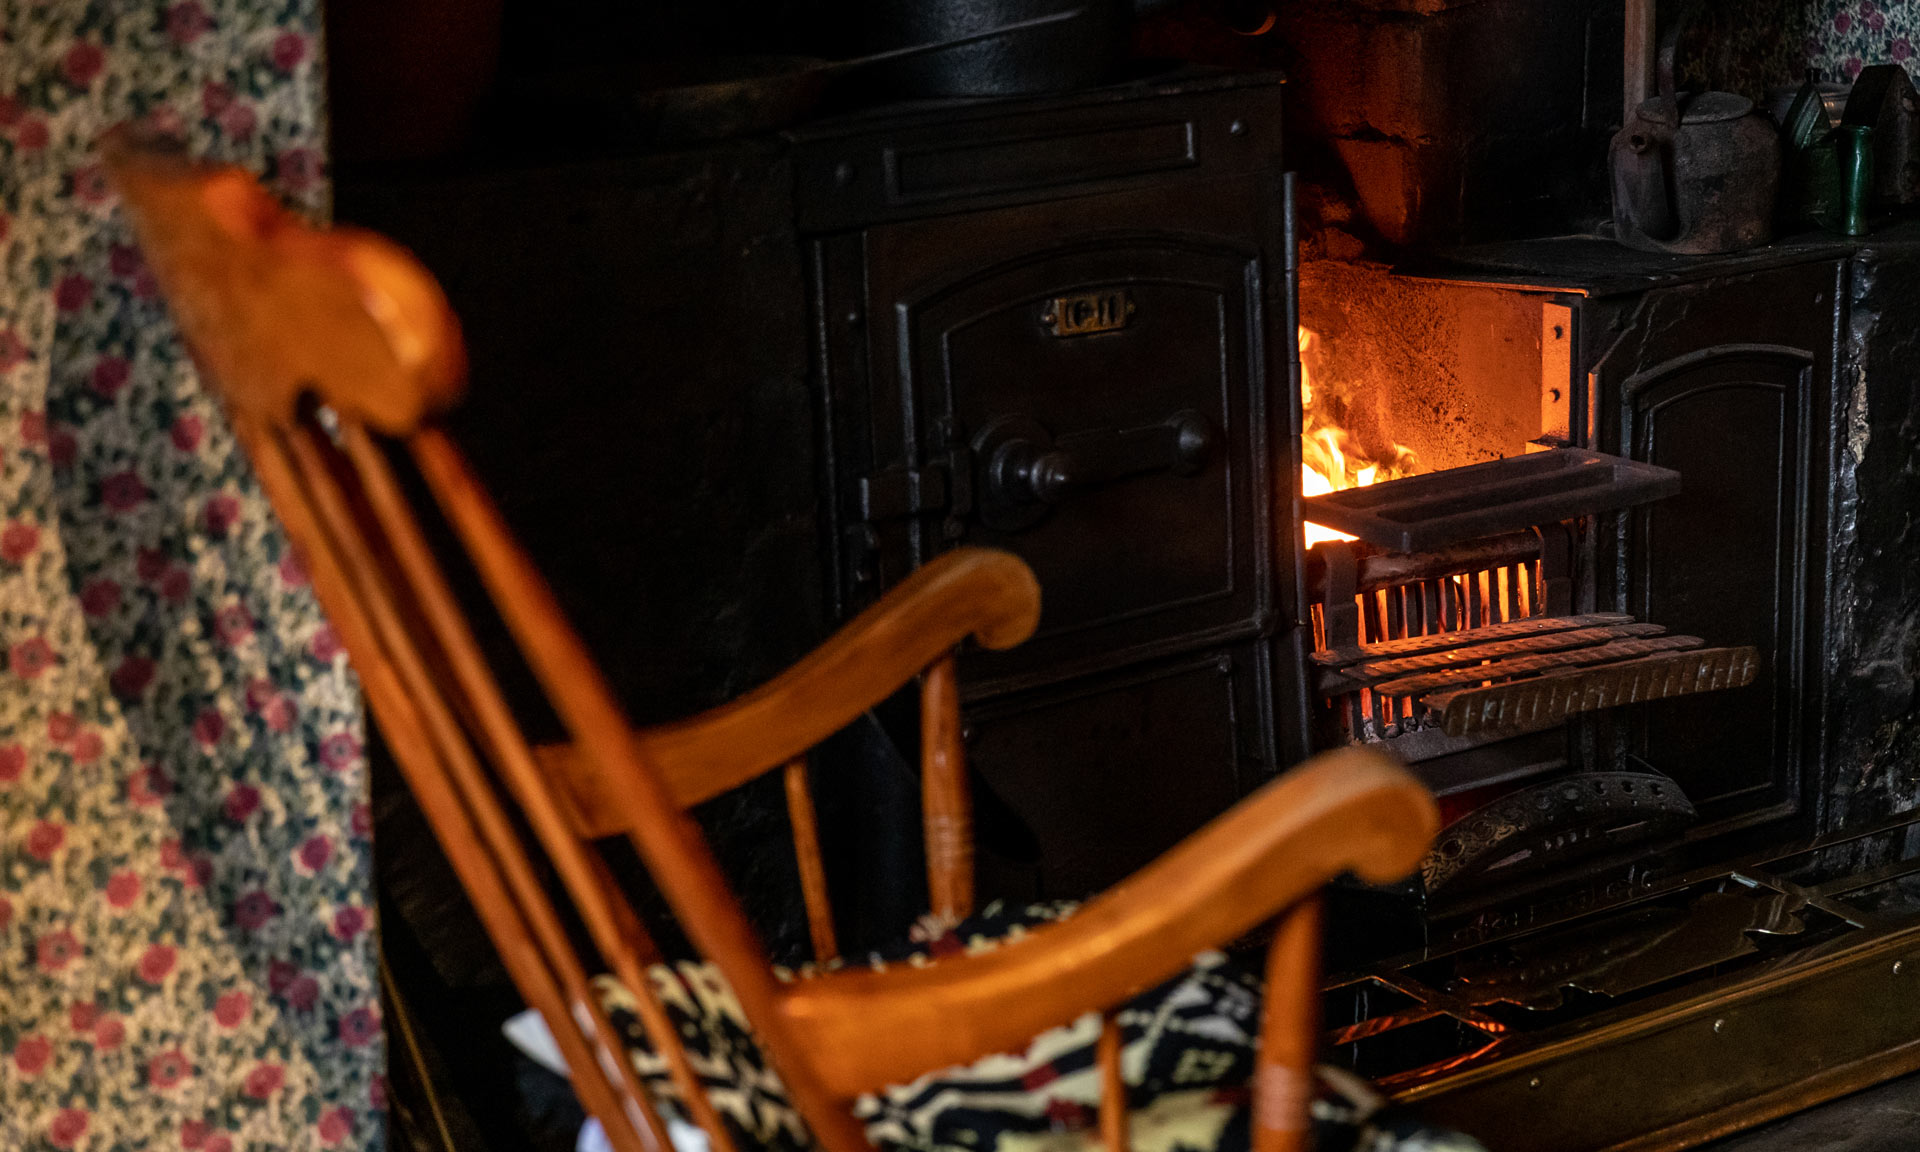 A fire roars at Yr Ysgwrn's stove with a rocking chair in the foreground